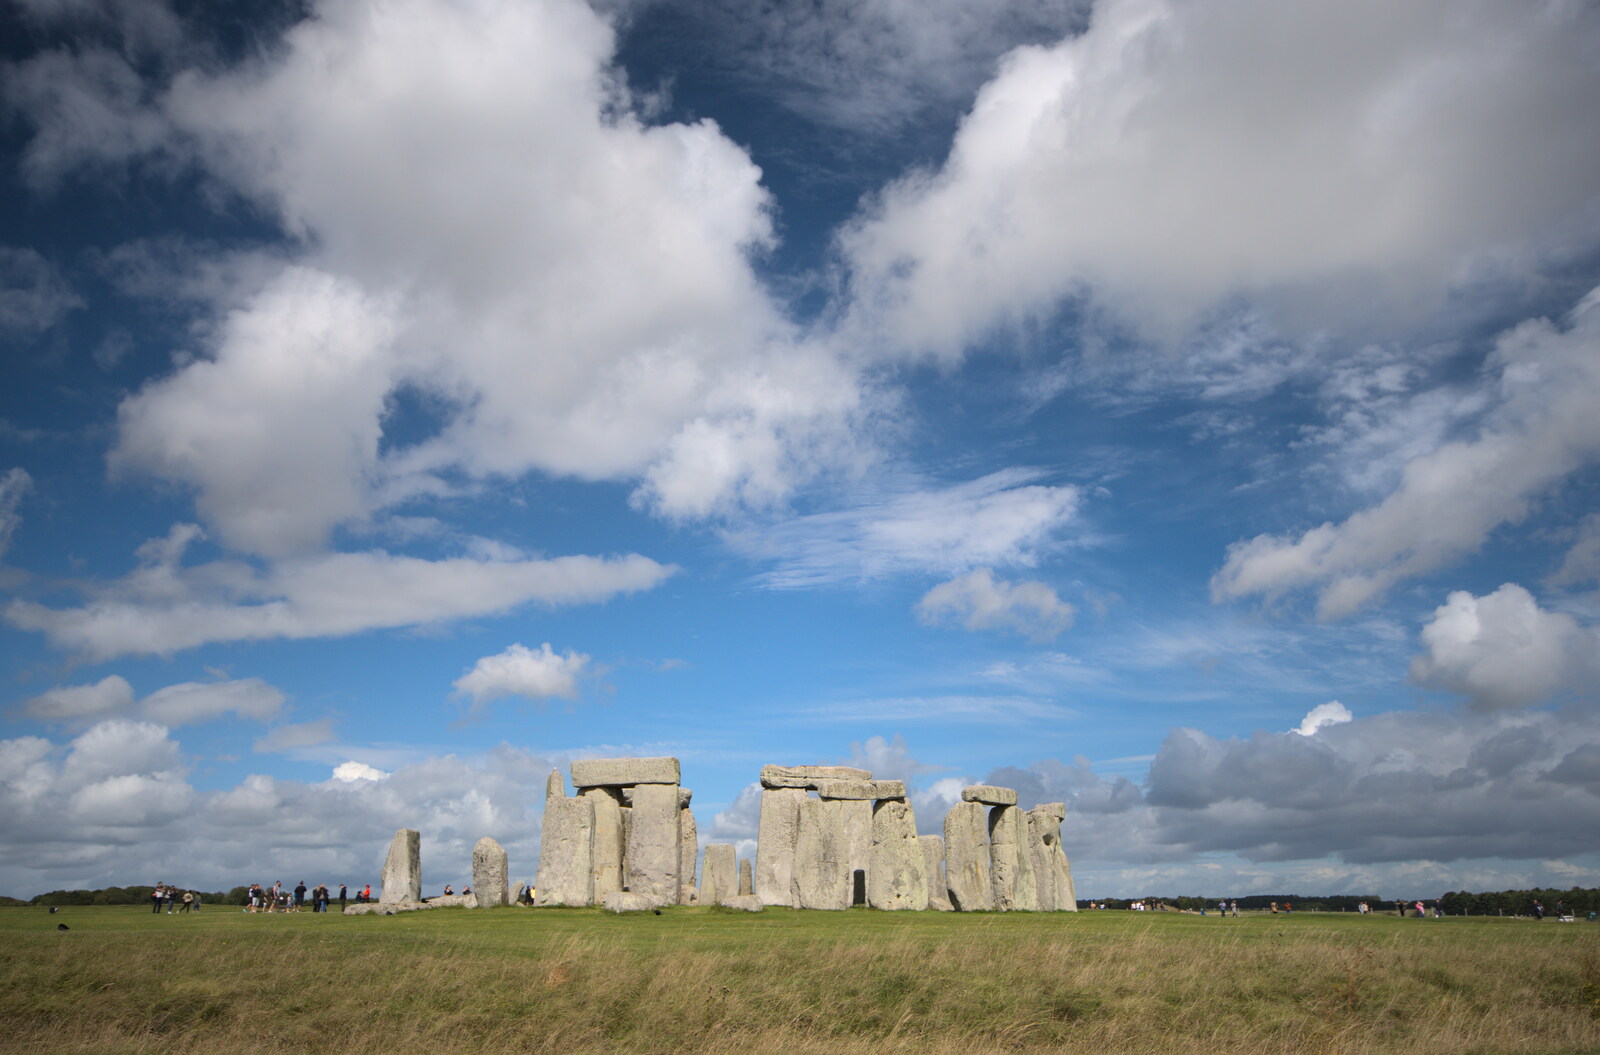 Fluffy clouds over Stonehenge from Stone Circles: Stonehenge and Avebury, Wiltshire - 22nd August 2020